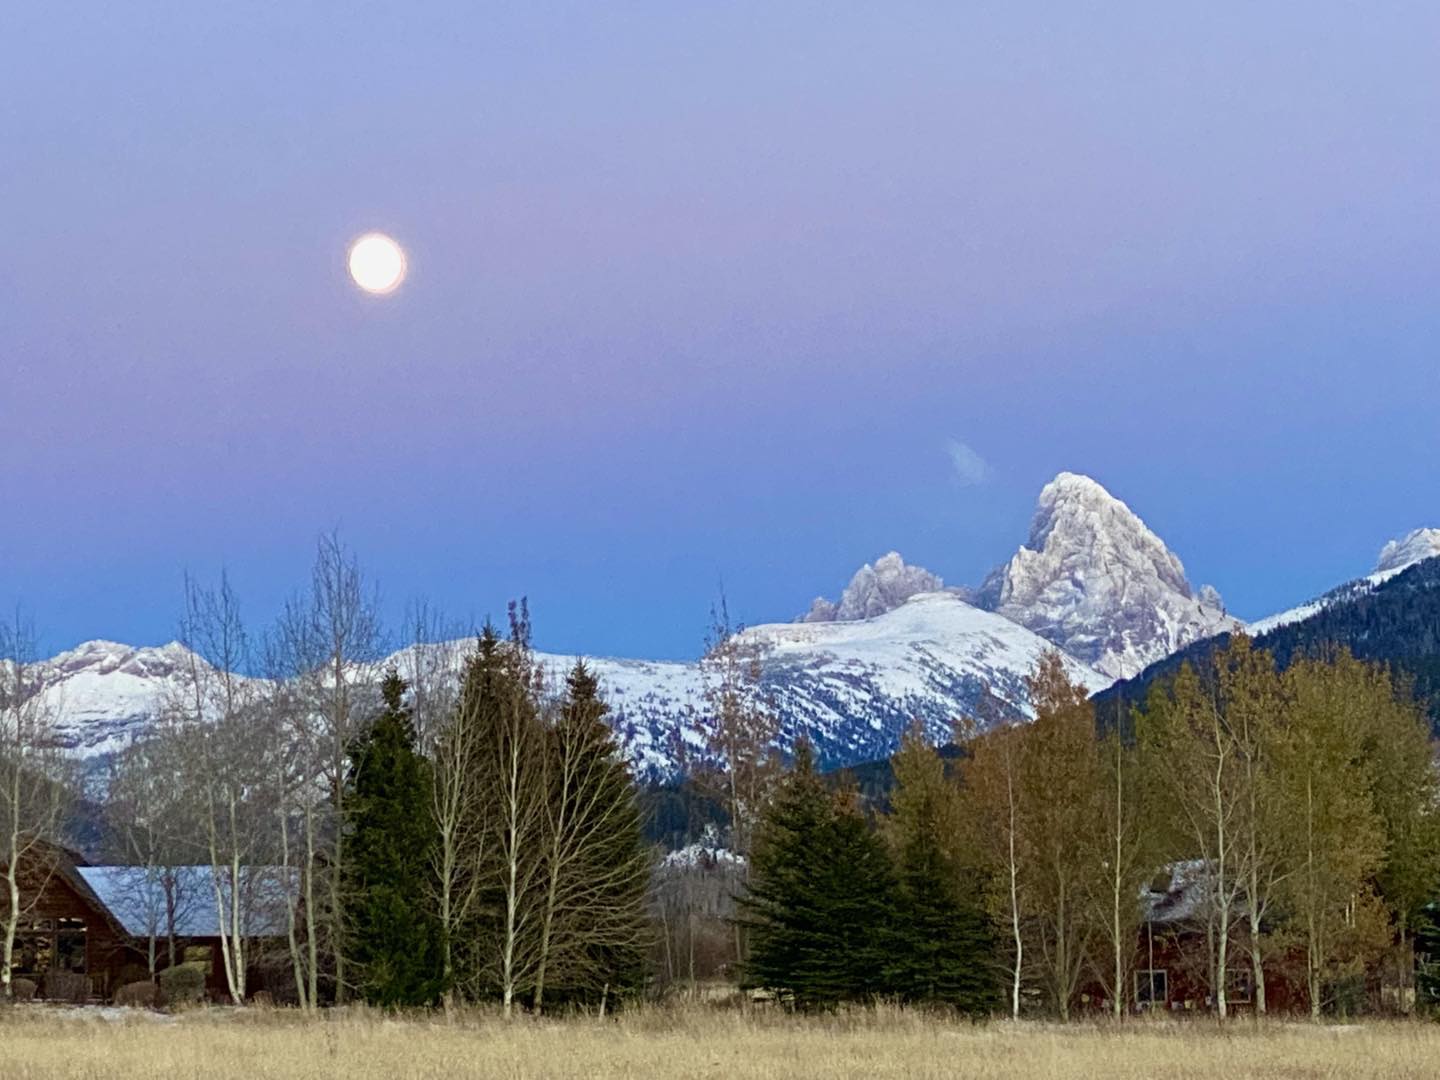 We have returned to Idaho, where early winter portends ski conditions are on the way in in Teton Valley. Photo from our living room by Cindy Orcutt. #bestofthegemstate #orcuttphotography #driggsidaho #tetonvalleyidaho #teronmountainrange #grandtetons